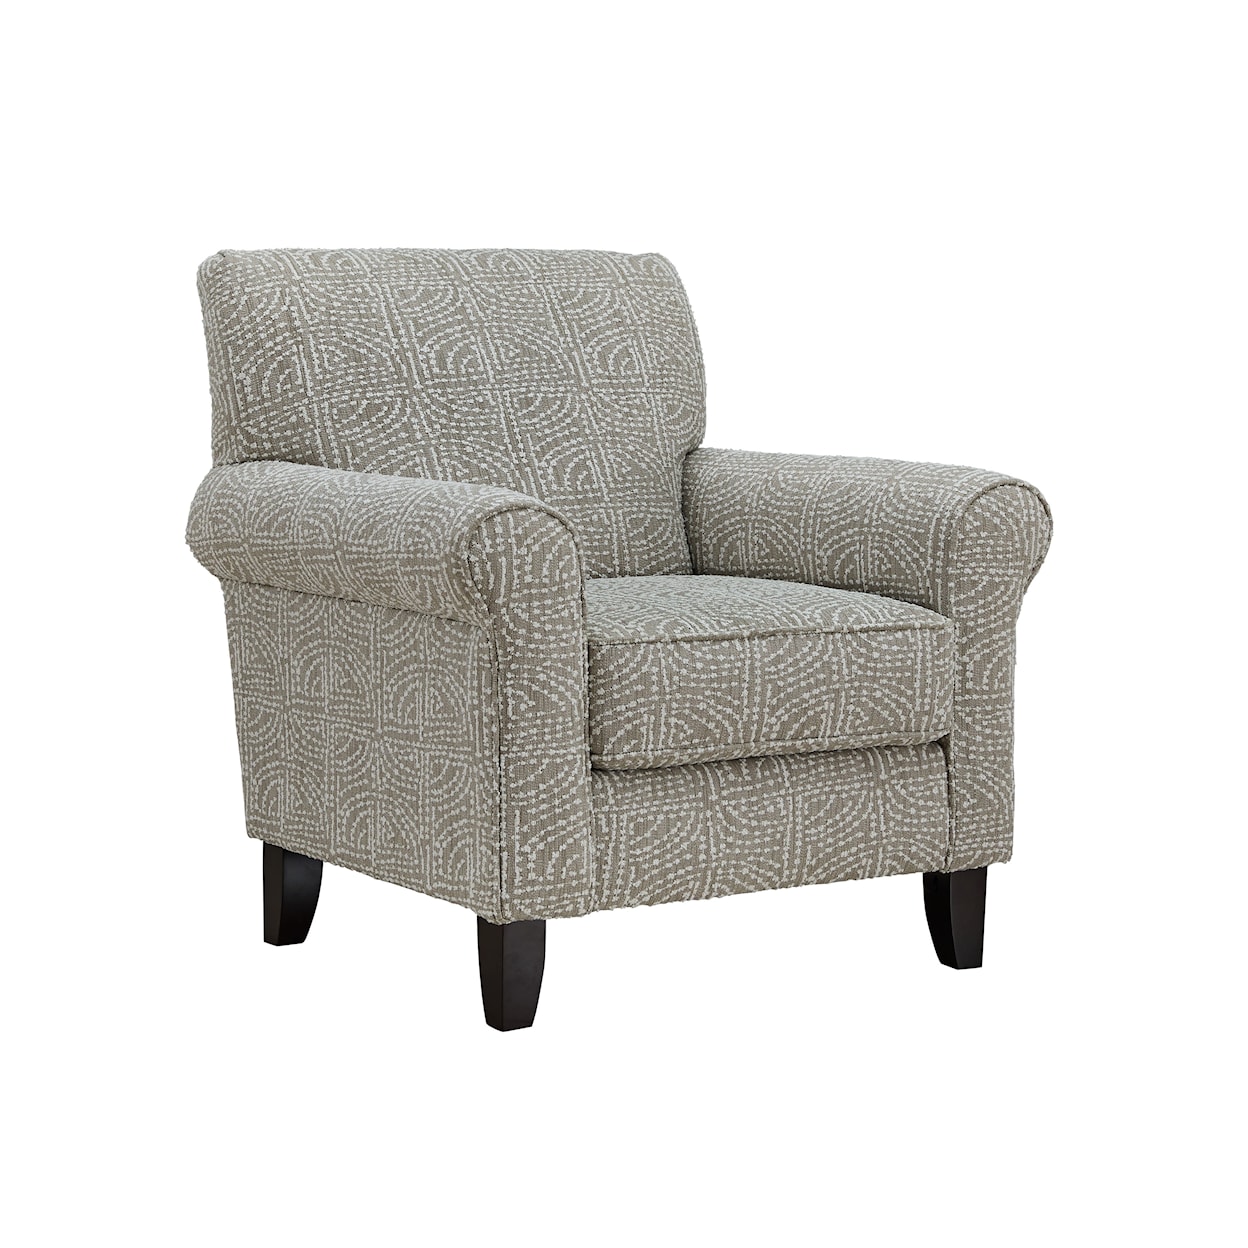 Fusion Furniture Lenora Accent Chair